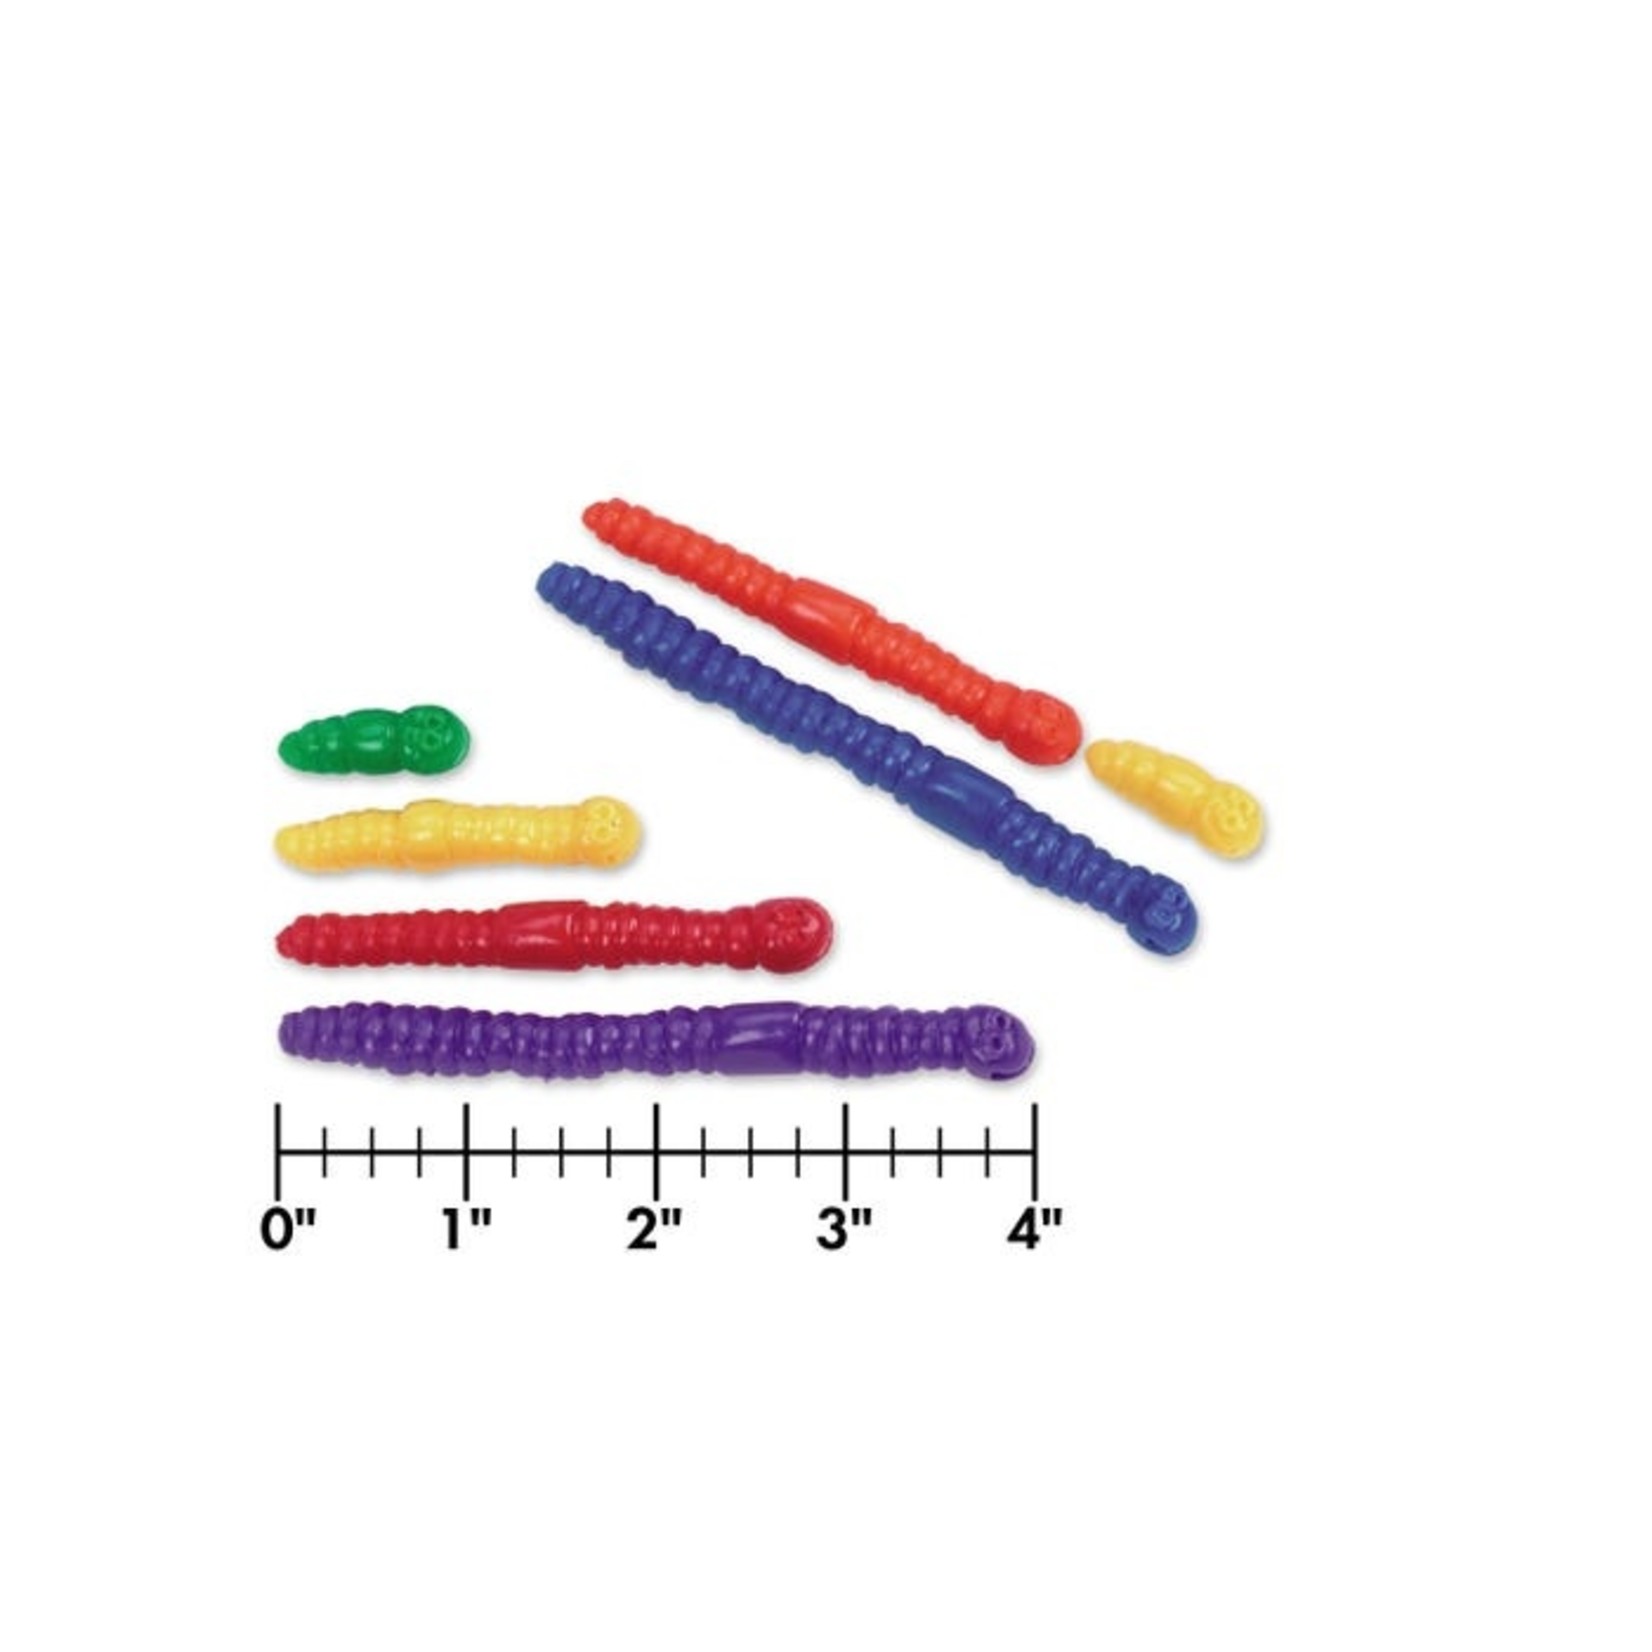 LEARNING RESOURCES INC Measuring Worms™ (Set of 72)